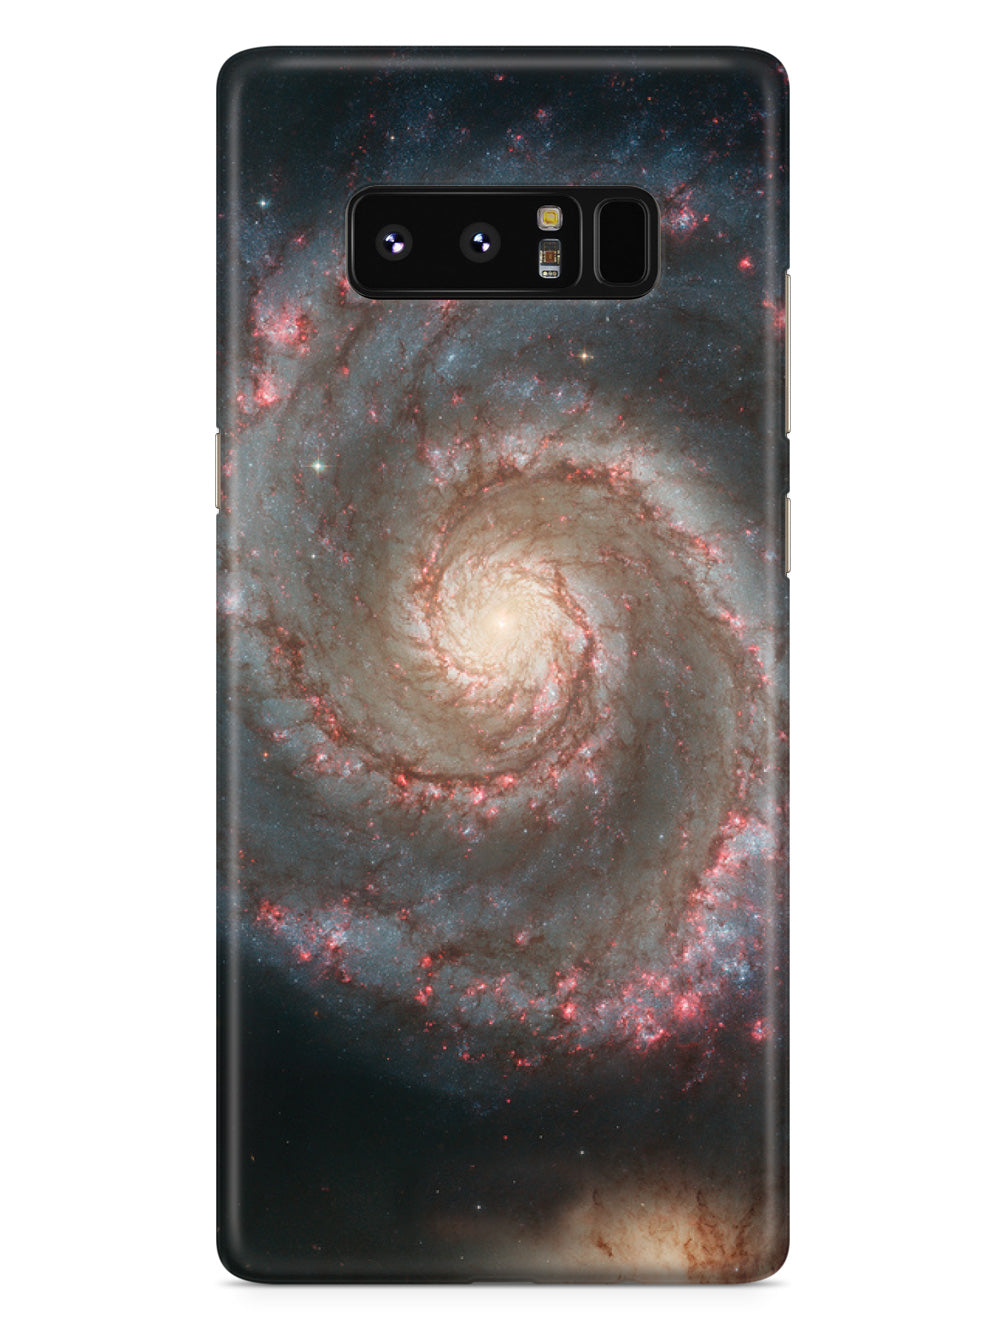 Whirlpool Galaxy - Messier 51 (M51) Outer Space Spiral Design Case